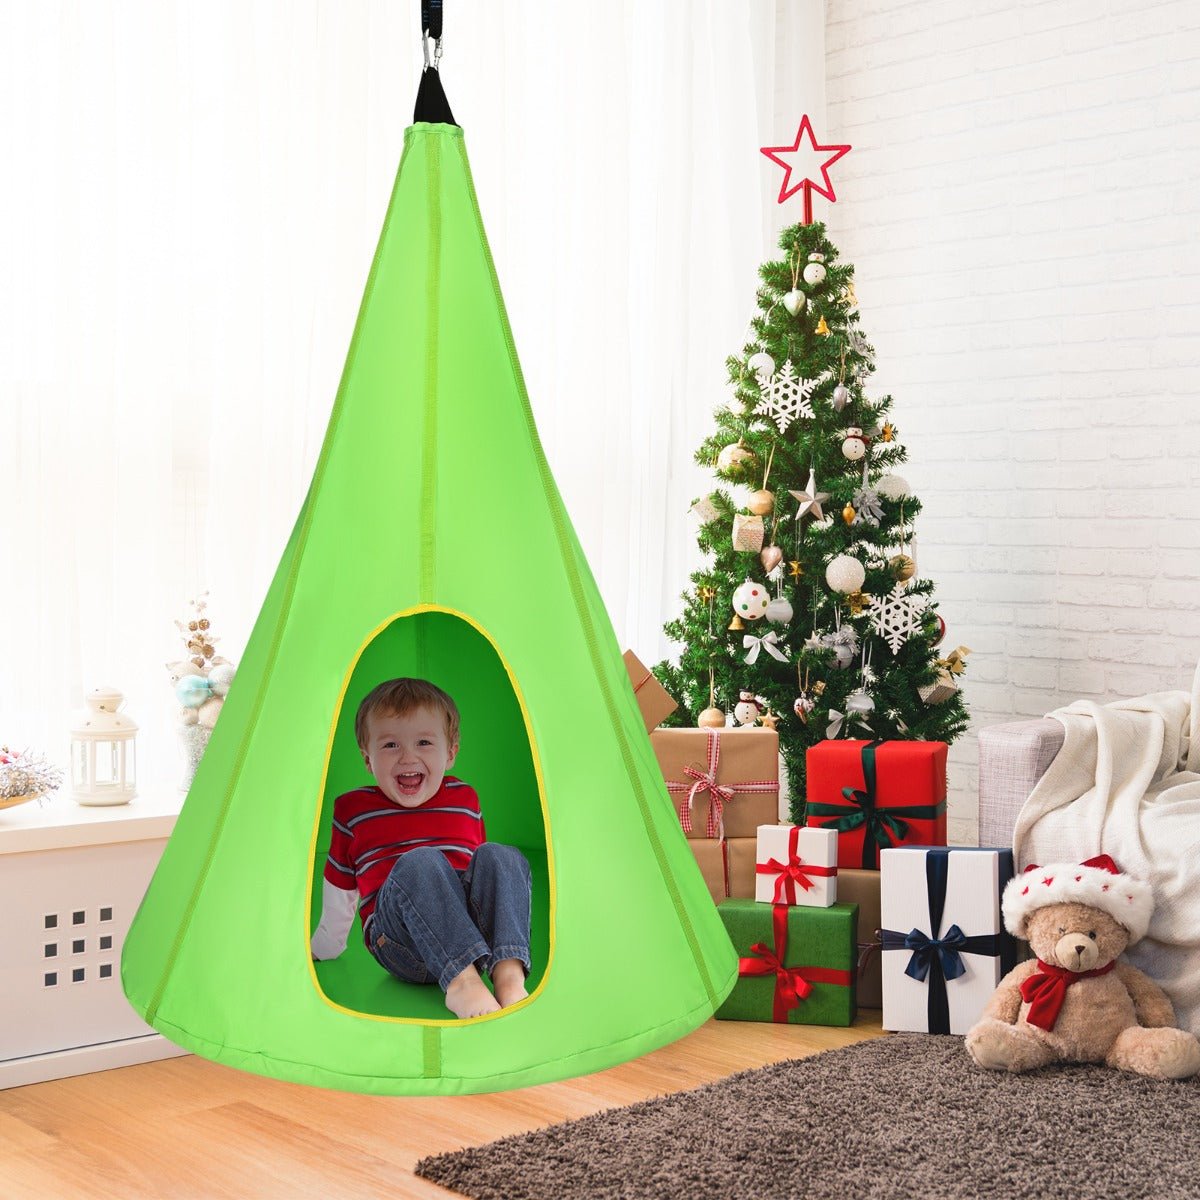 Swing and Explore: Kids Nest Swing Tent Green 80cm, Discover Outdoor Joy